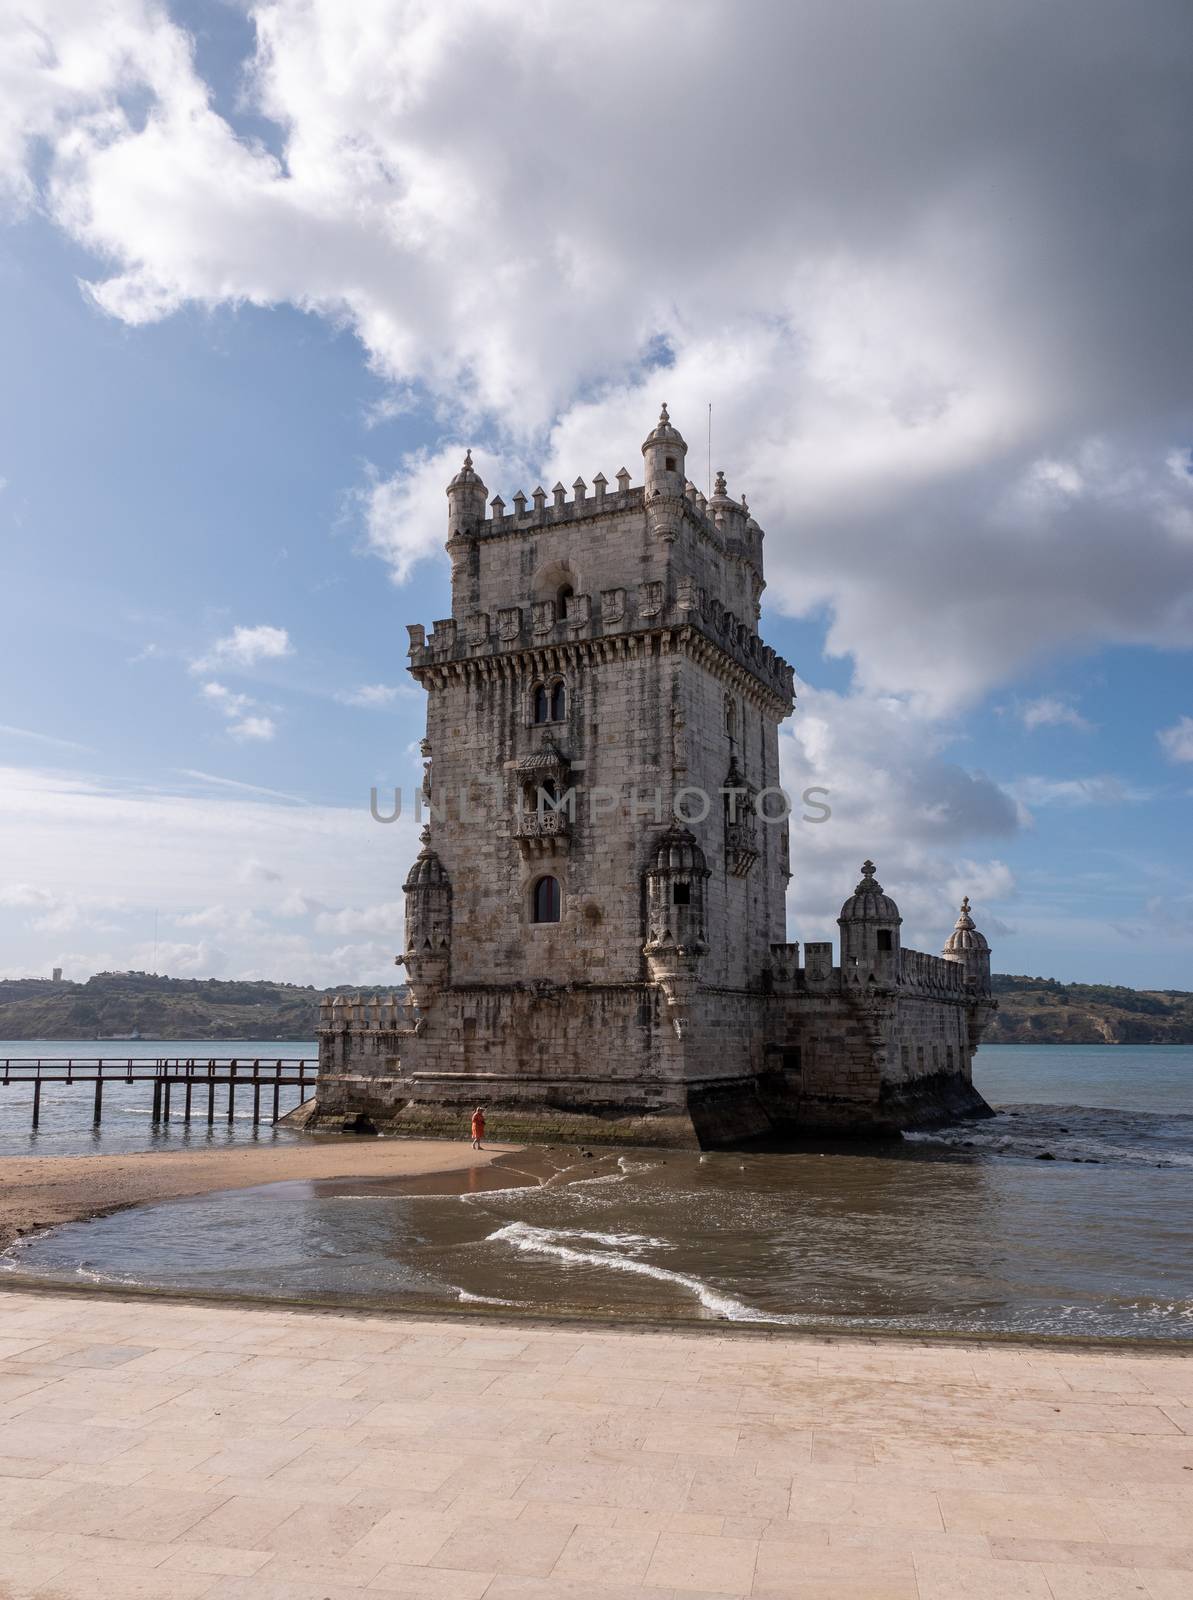 Panorama of the Tower of Belem near Lisbon by steheap